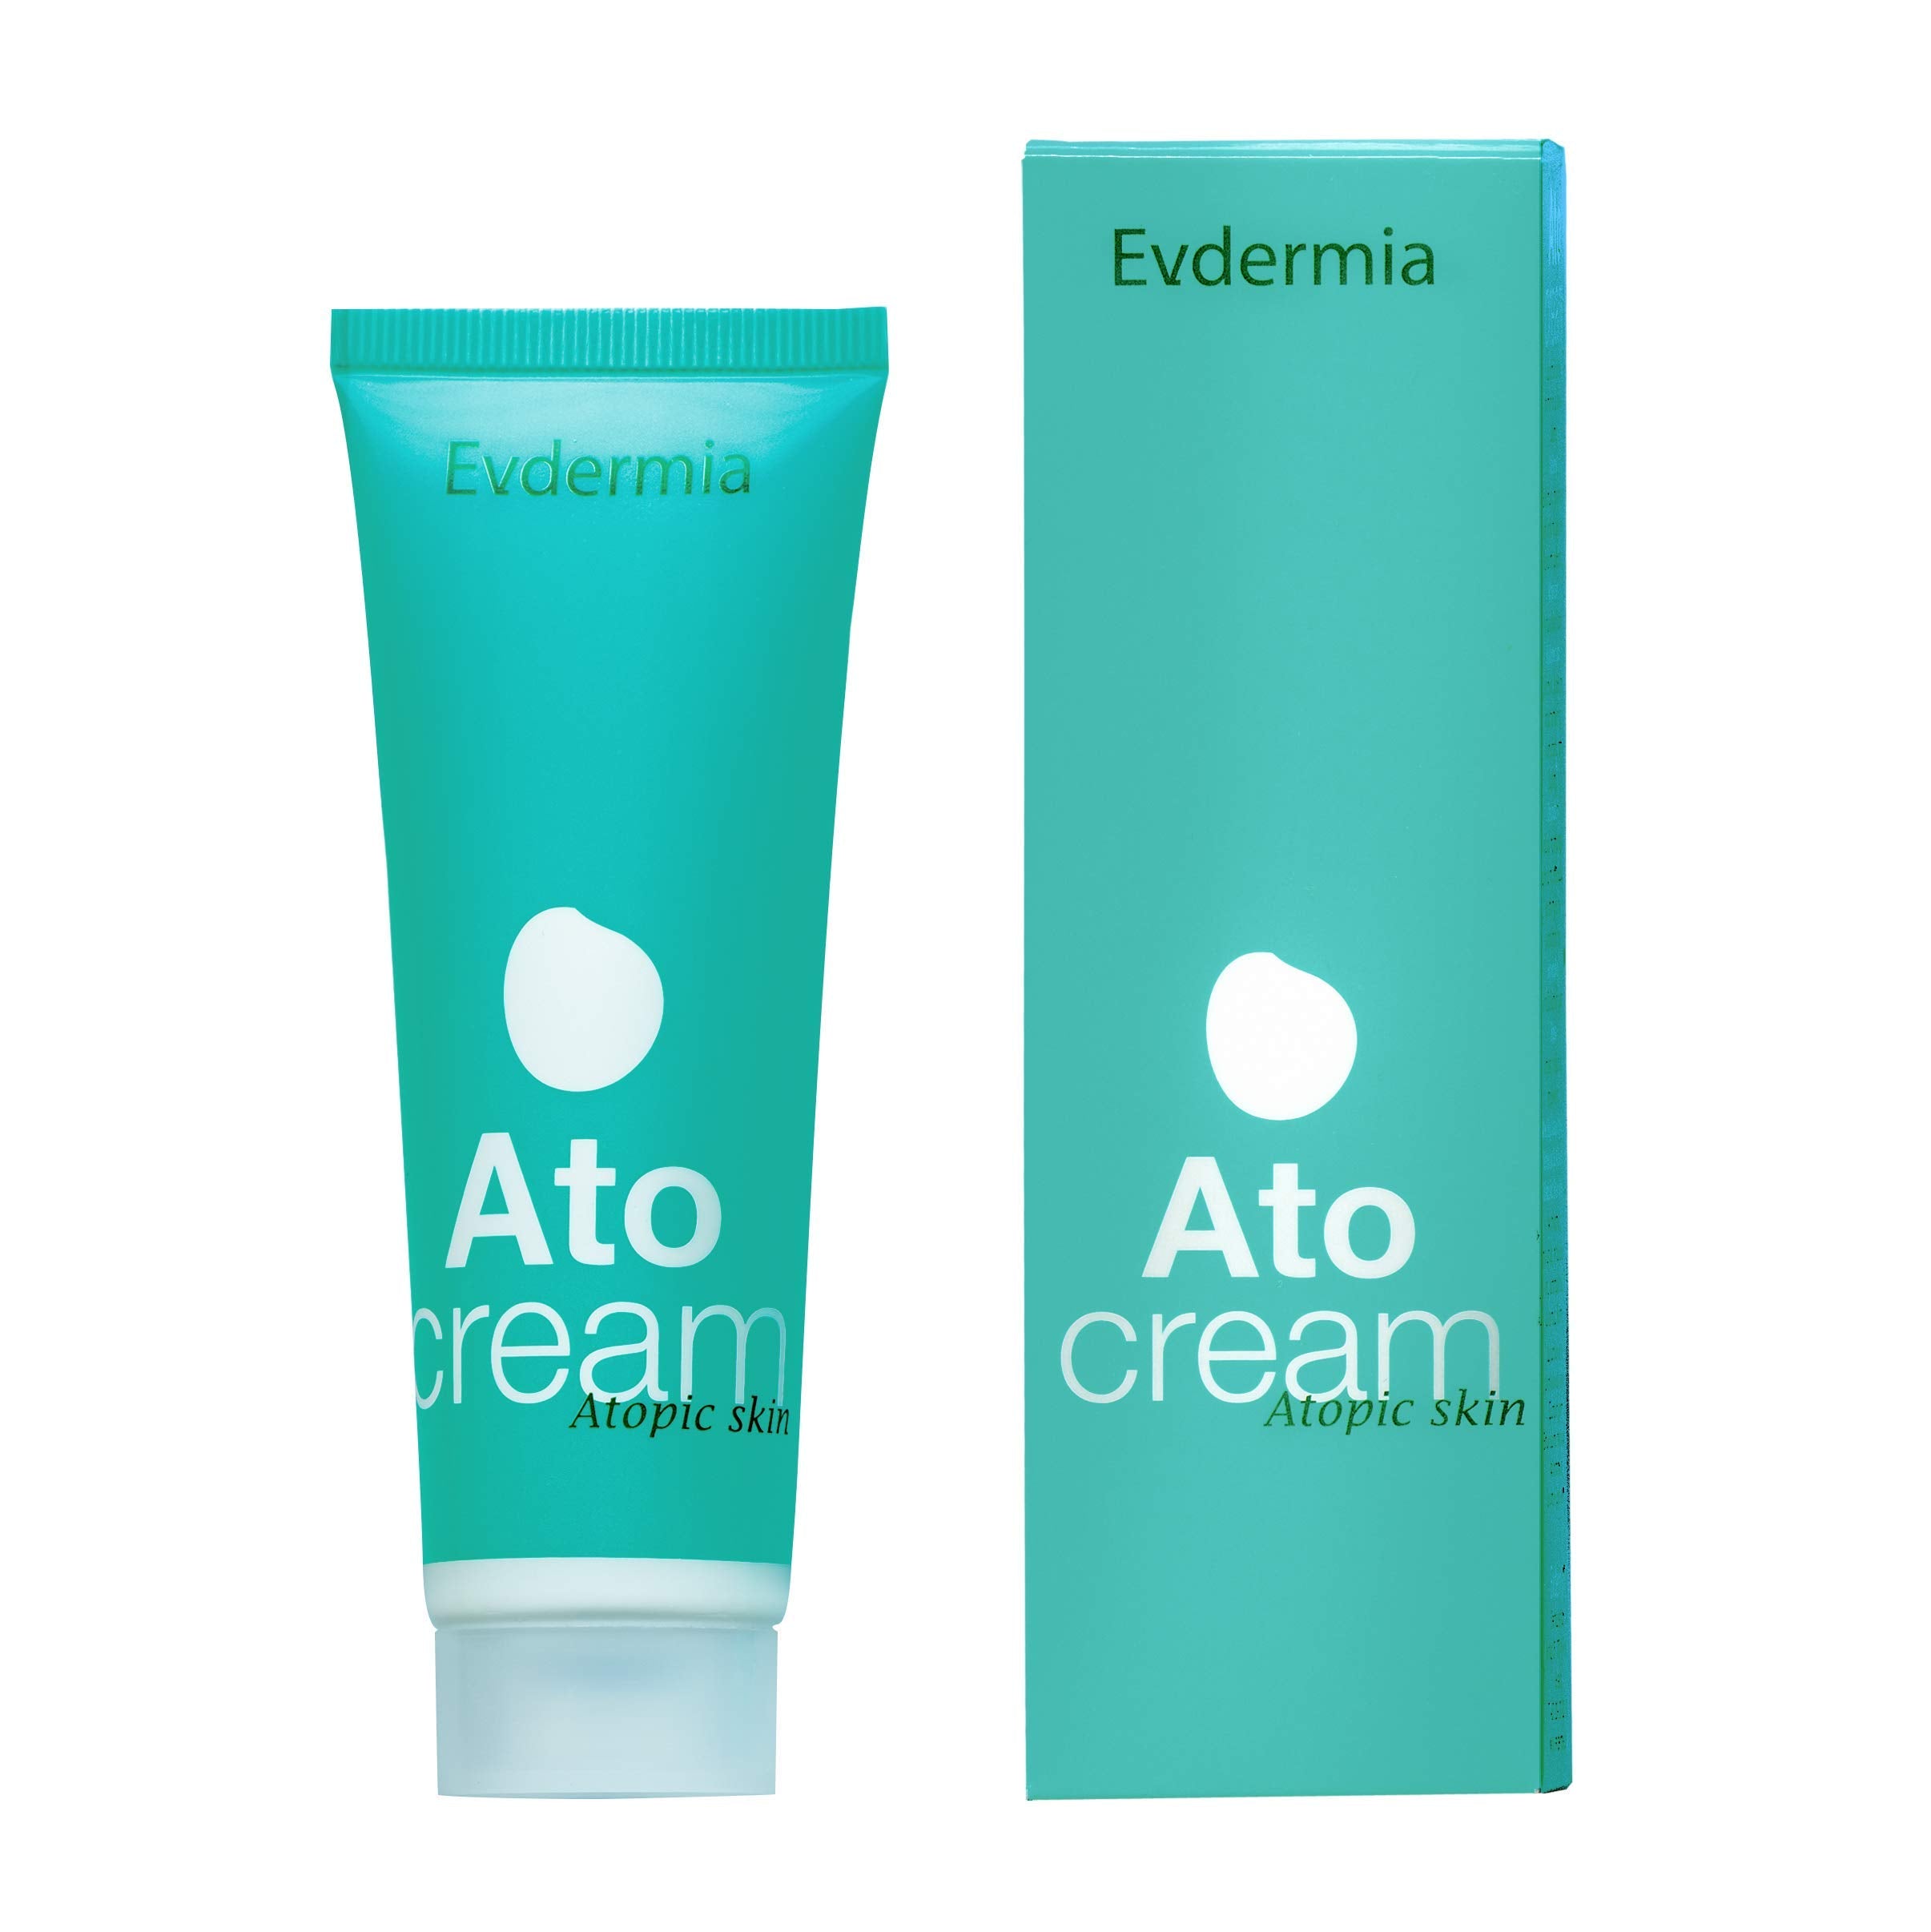 Ato Cream | Ideal for dry or itchy skins prone to Eczema and Atopic dermatitis. With Strong soothing, hydrating and rejuvenating properties. For face and eyelids. Healthy looking and balanced skin